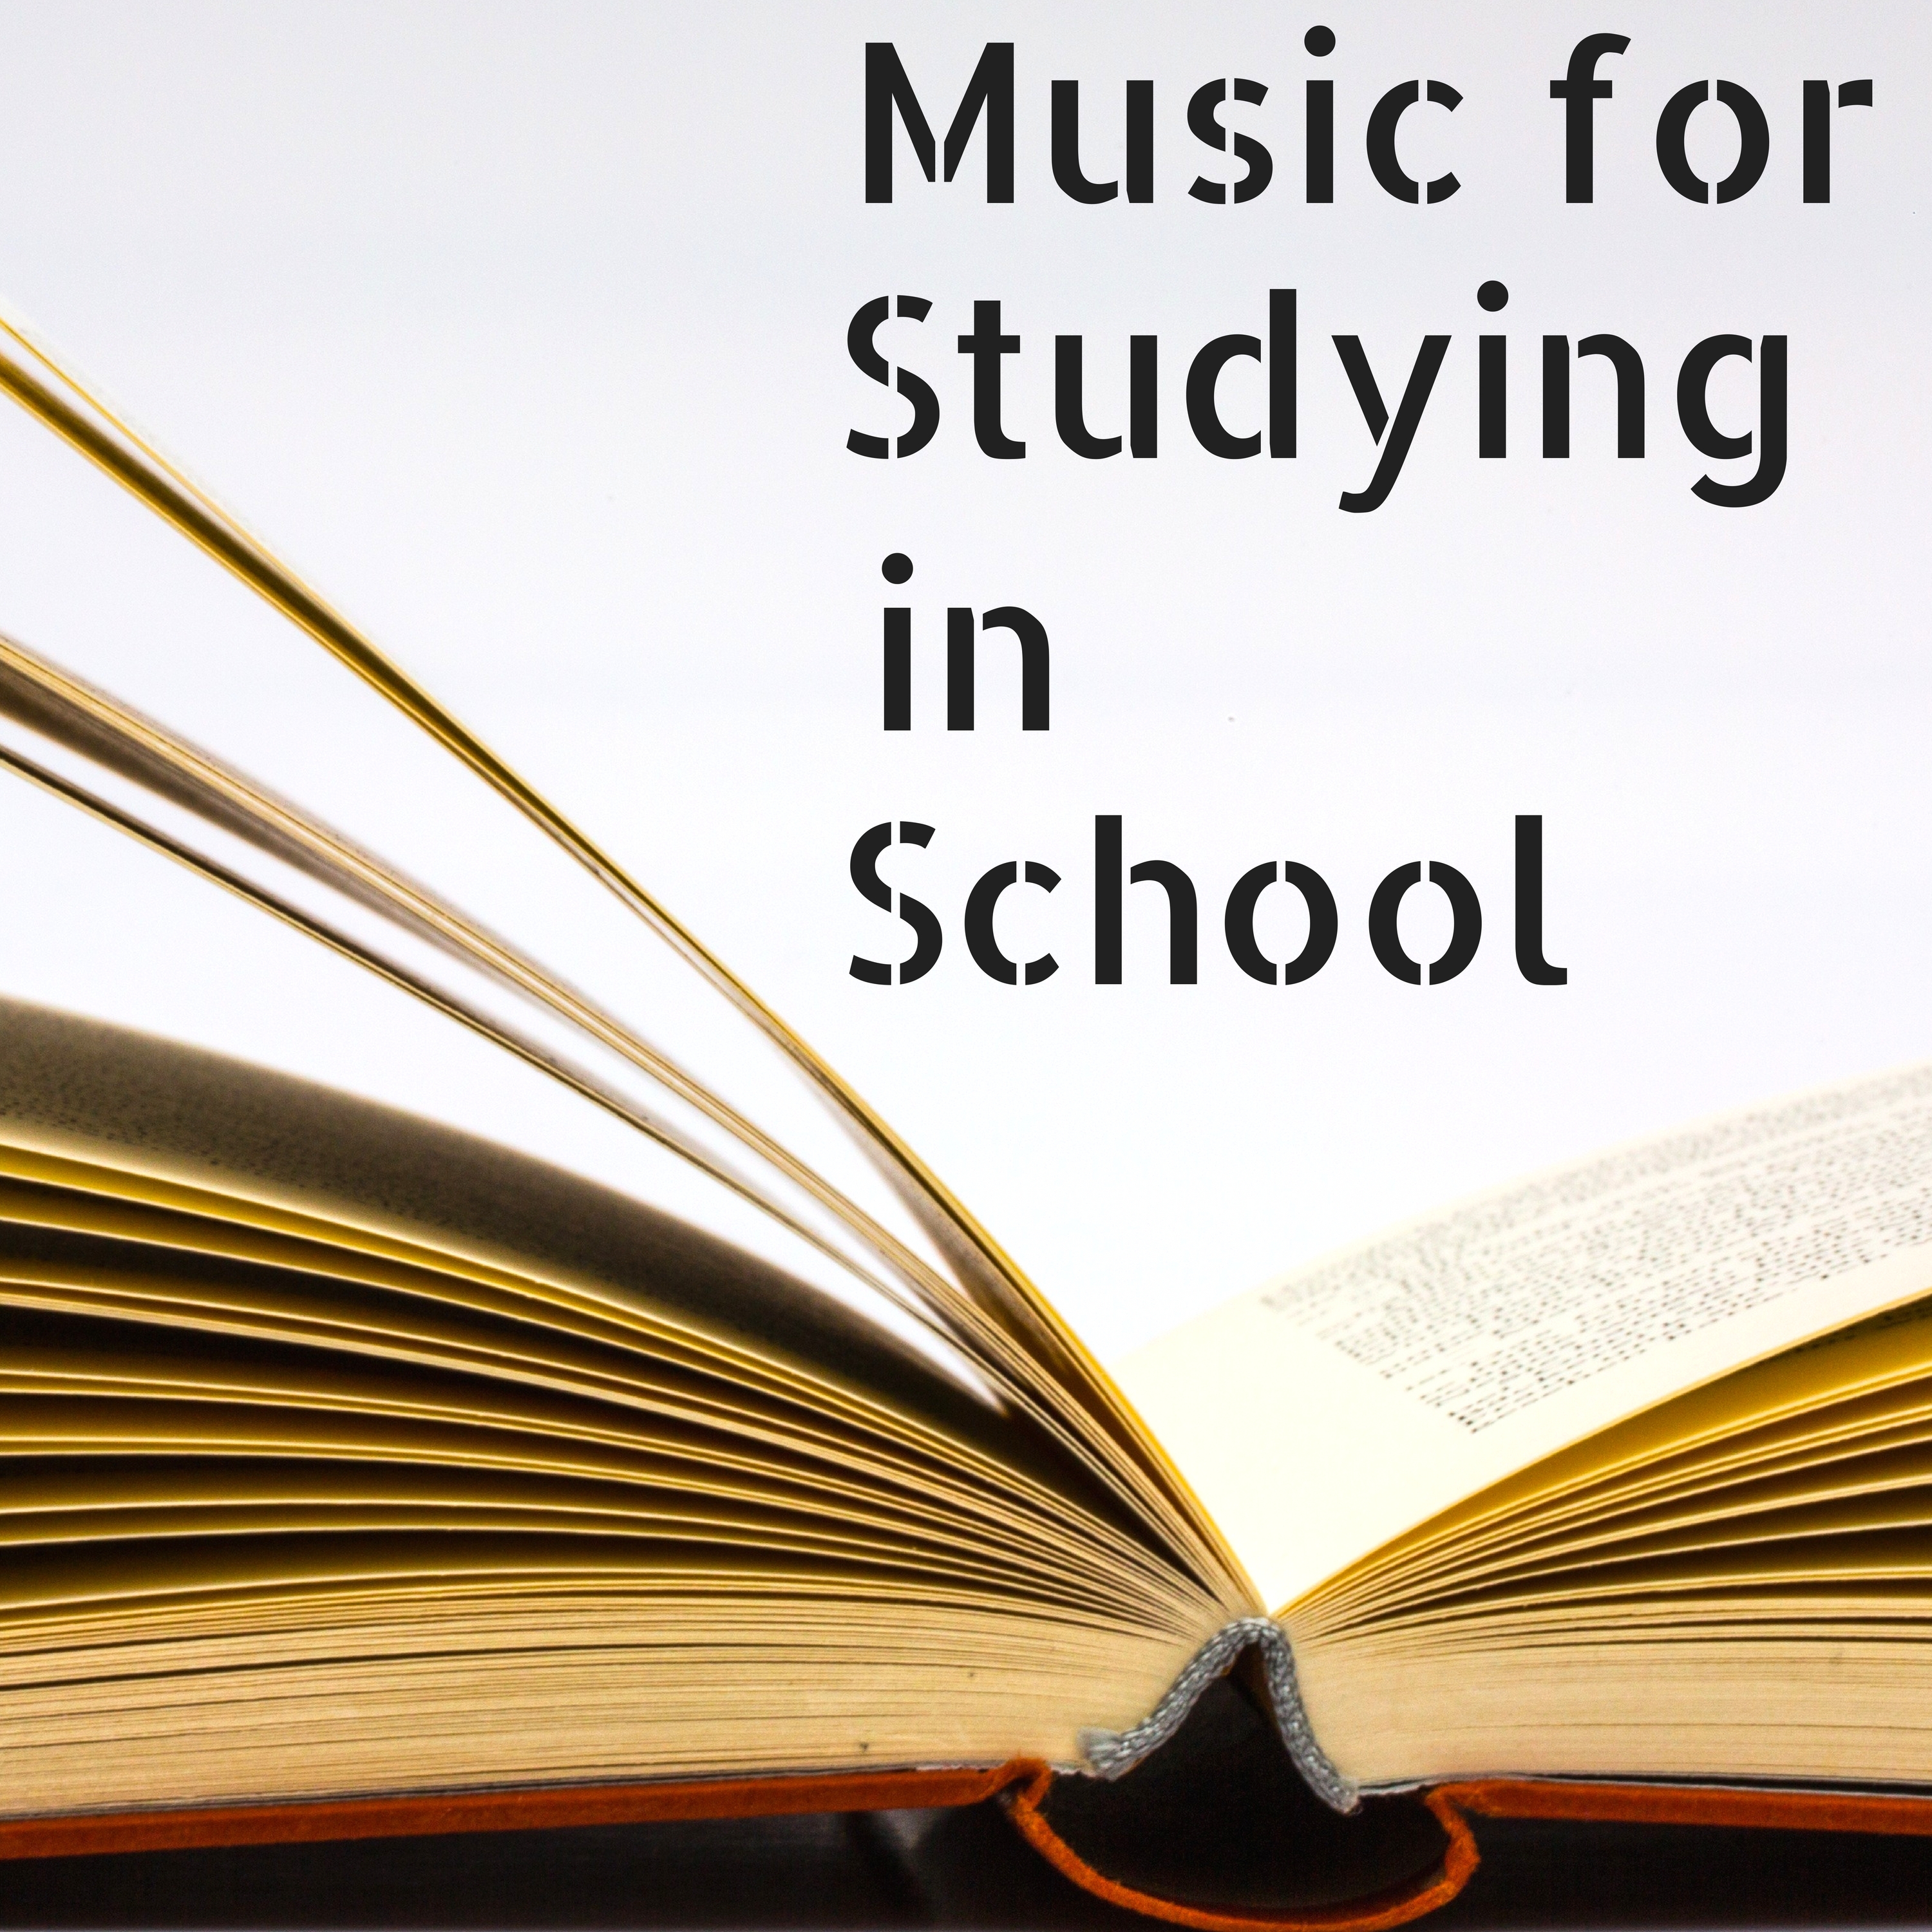 Music for Studying in School - Pure Relaxation to Focus on Study, Calming Peaceful Songs